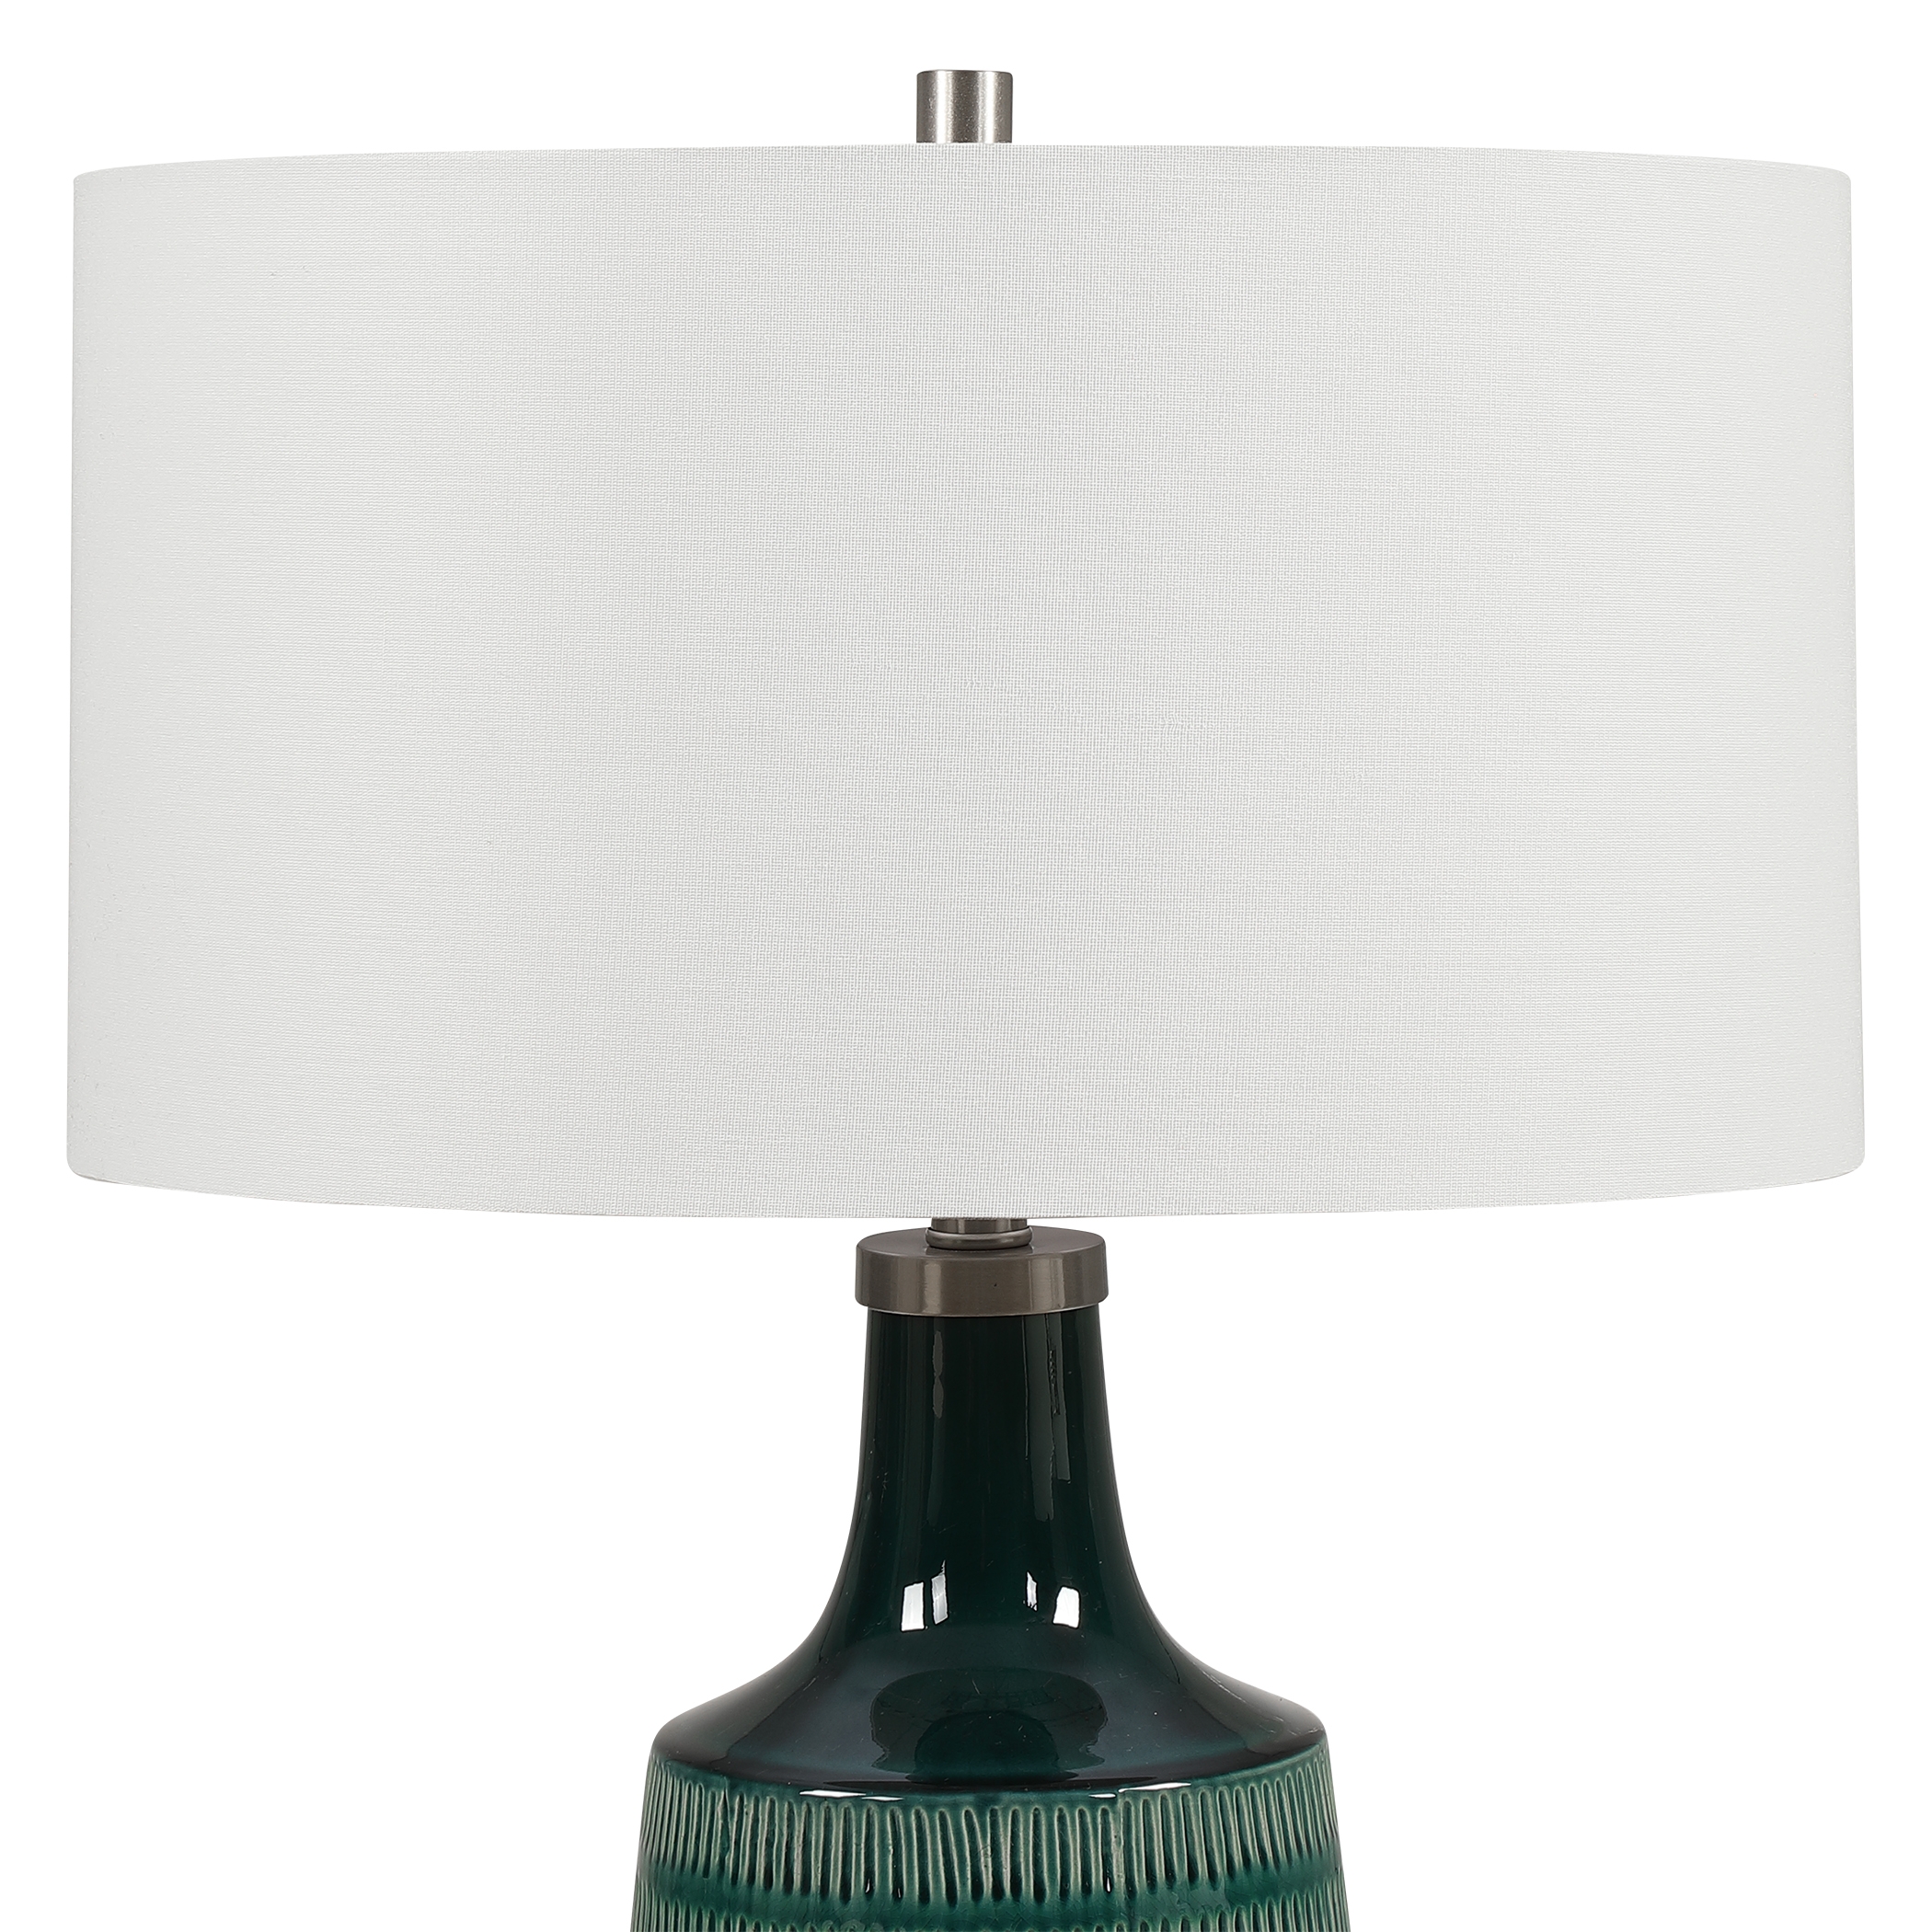 Scouts Deep Green Table Lamp - Image 4